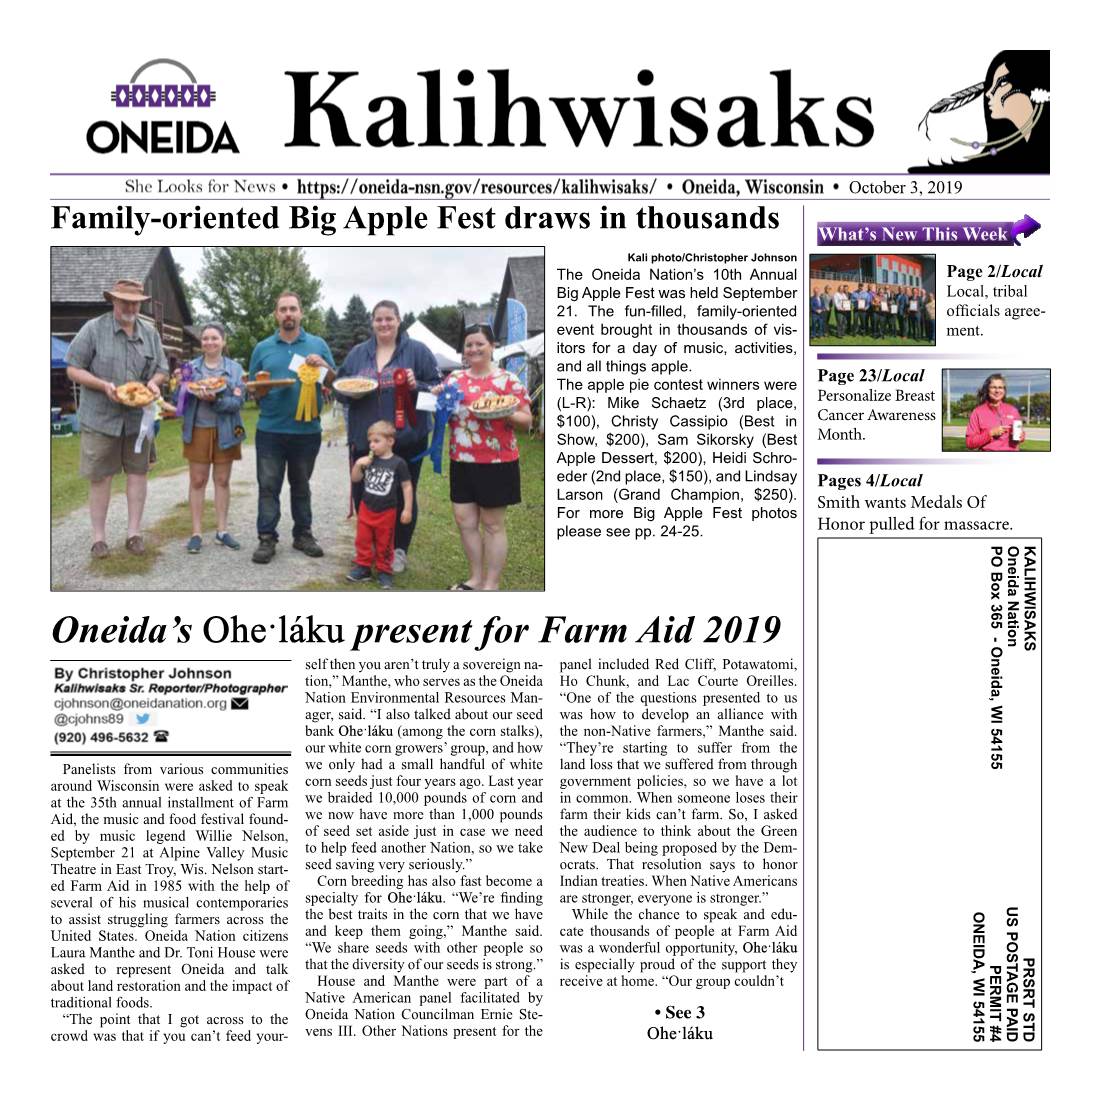 October 3, 2019 What’S New This Week What’S Page 23/ Pages 4/Local of Medals Wants Smith Massacre